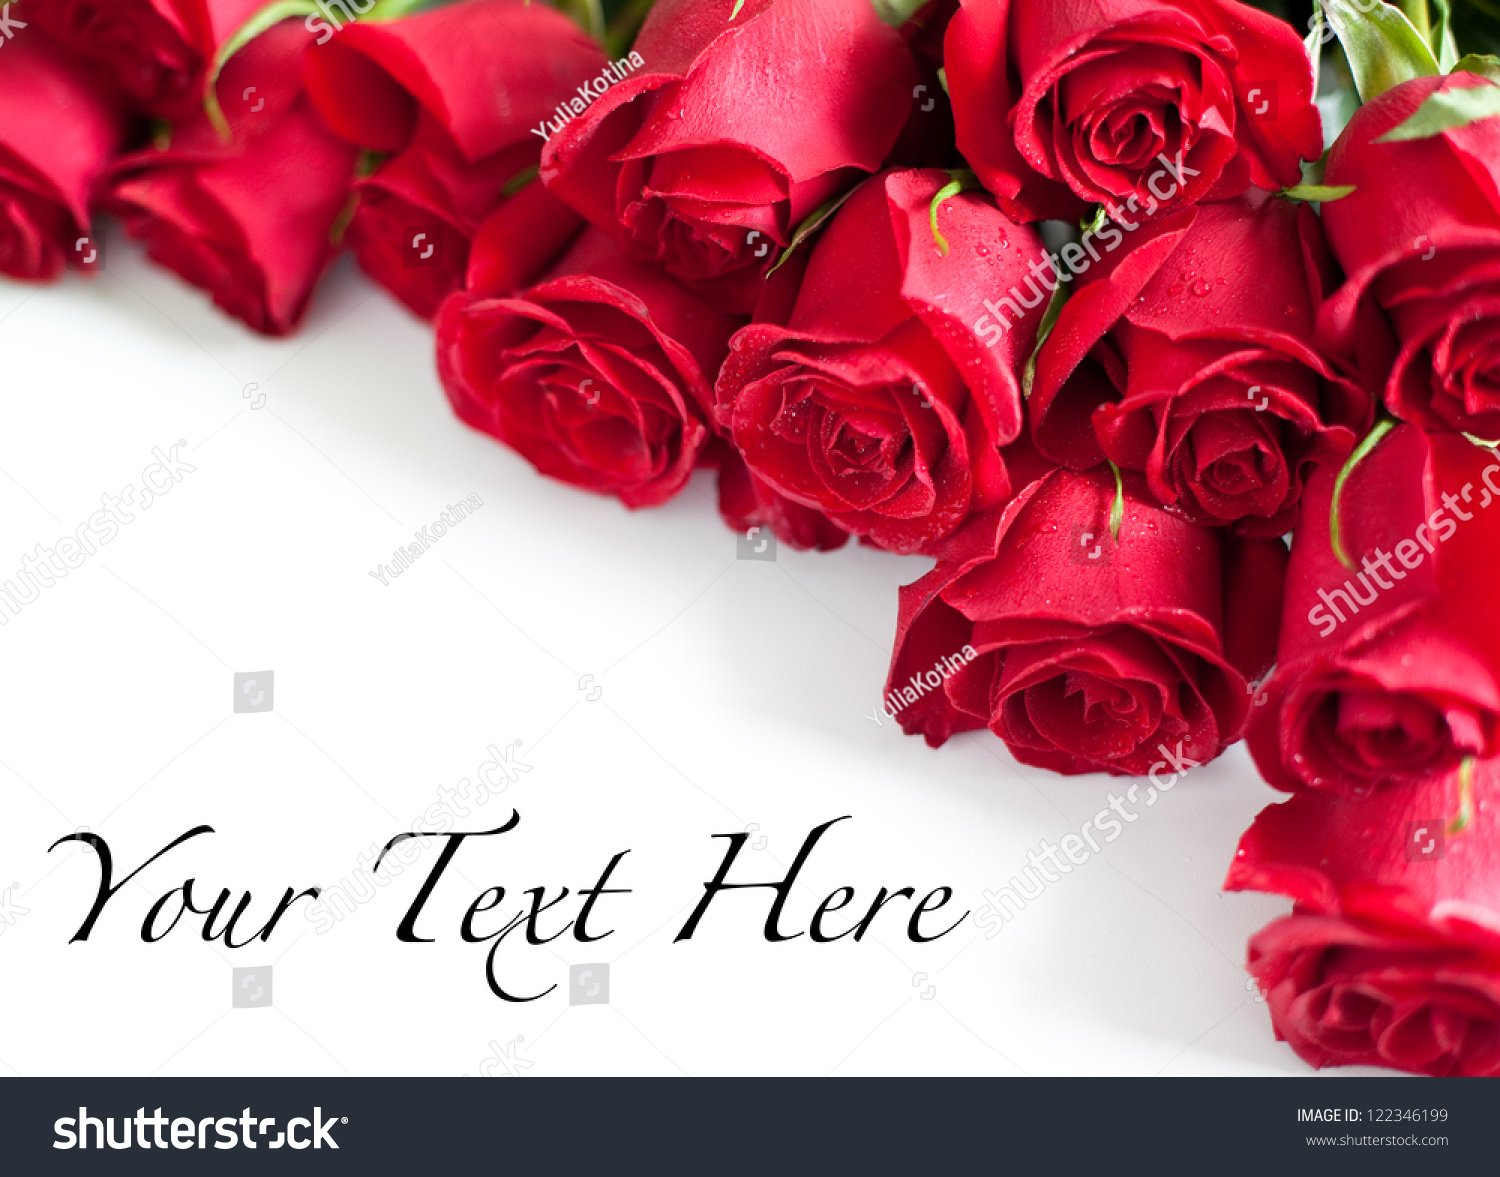 Red Roses On White Background Stock Photo